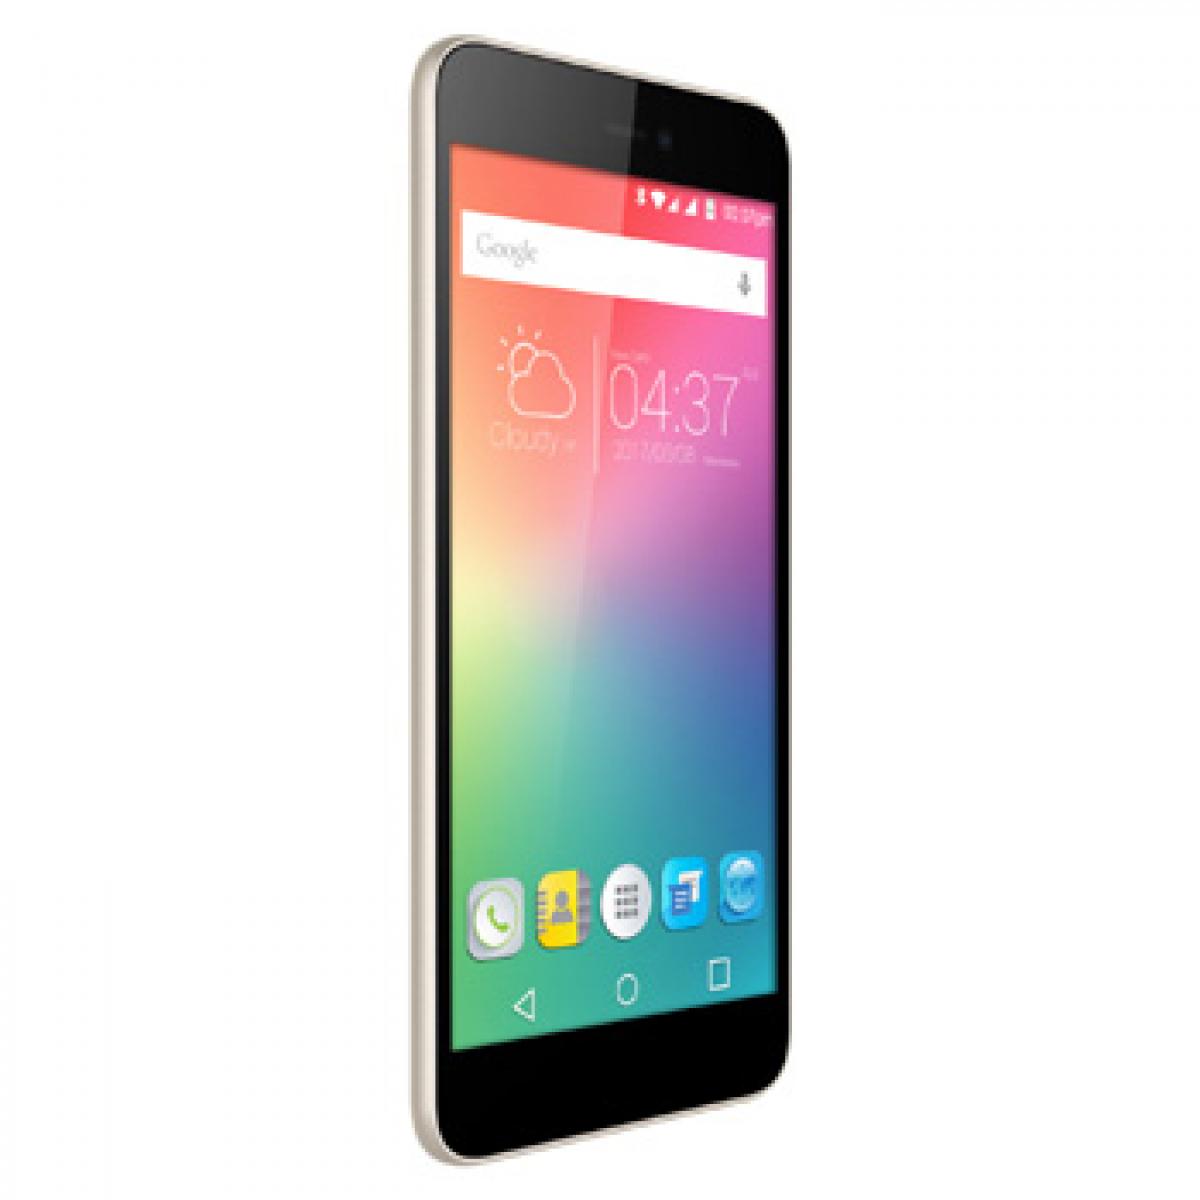 Micromax Canvas Spark 3 launched